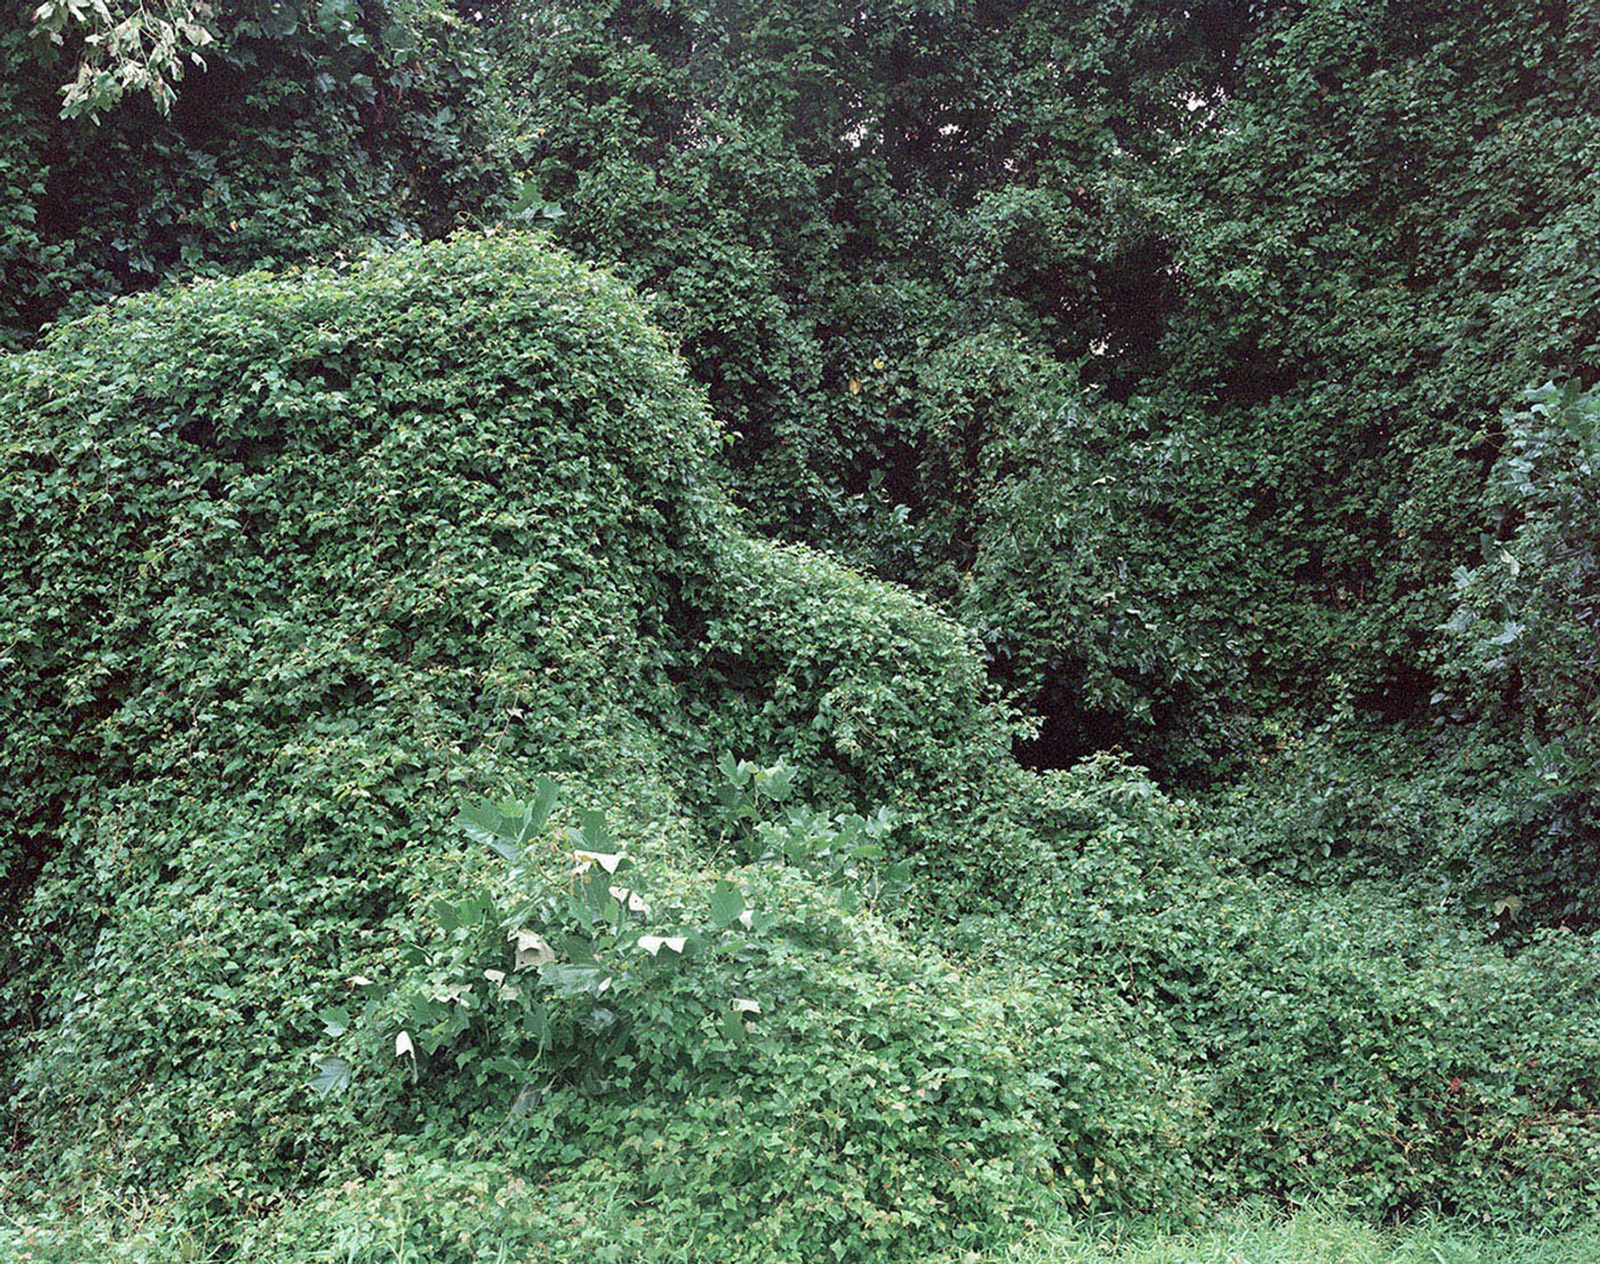 © Chase Barnes - Kudzu and trees obscure a view of the CIA headquarters in Langley, Virginia.